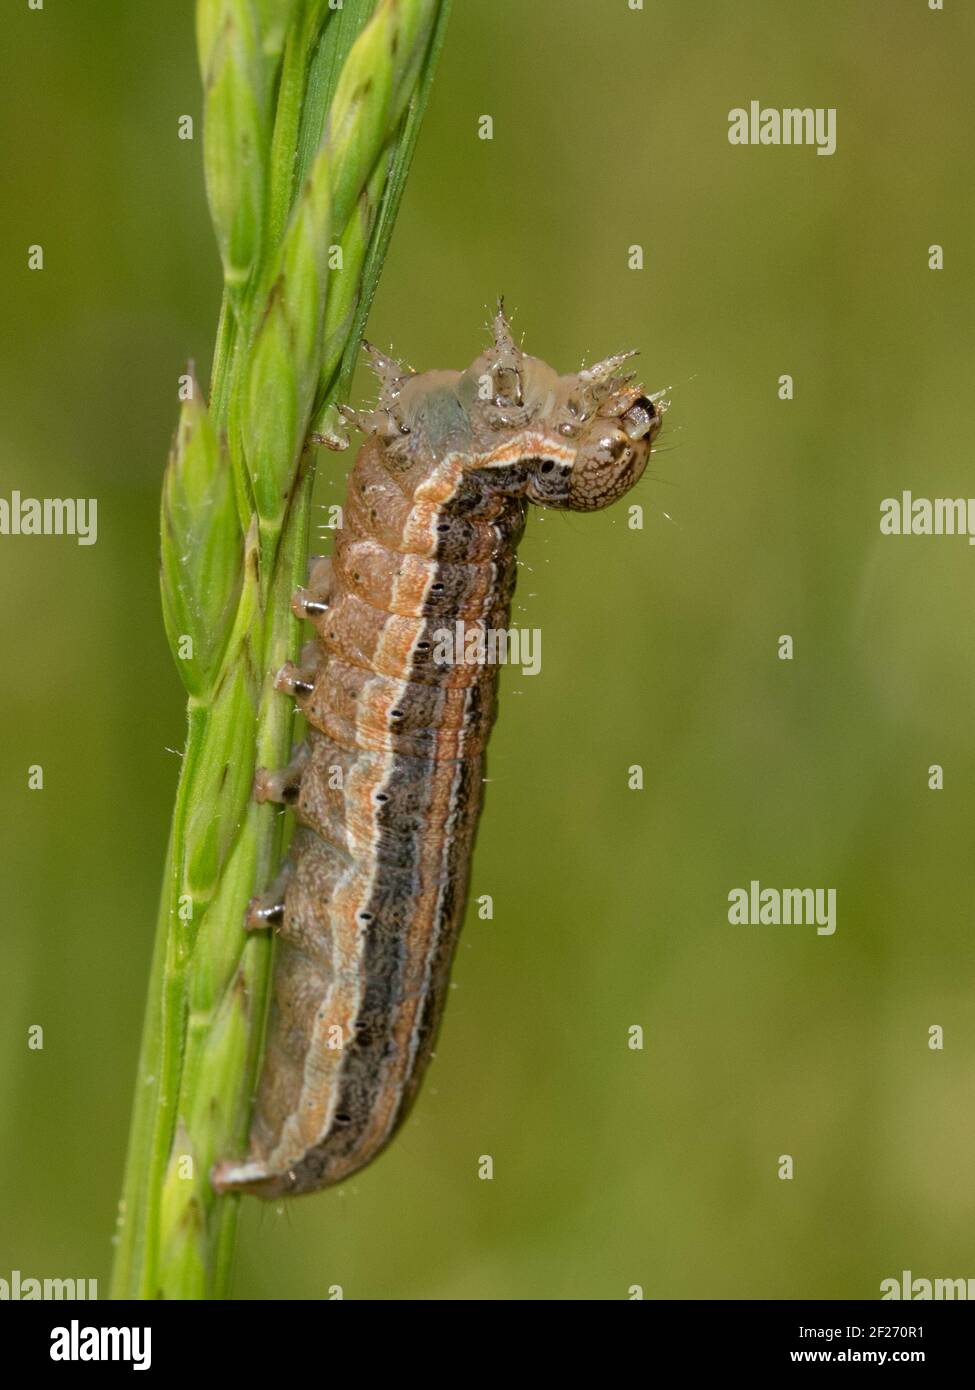 Close-up of a cutworm in a defensive posture. Stock Photo